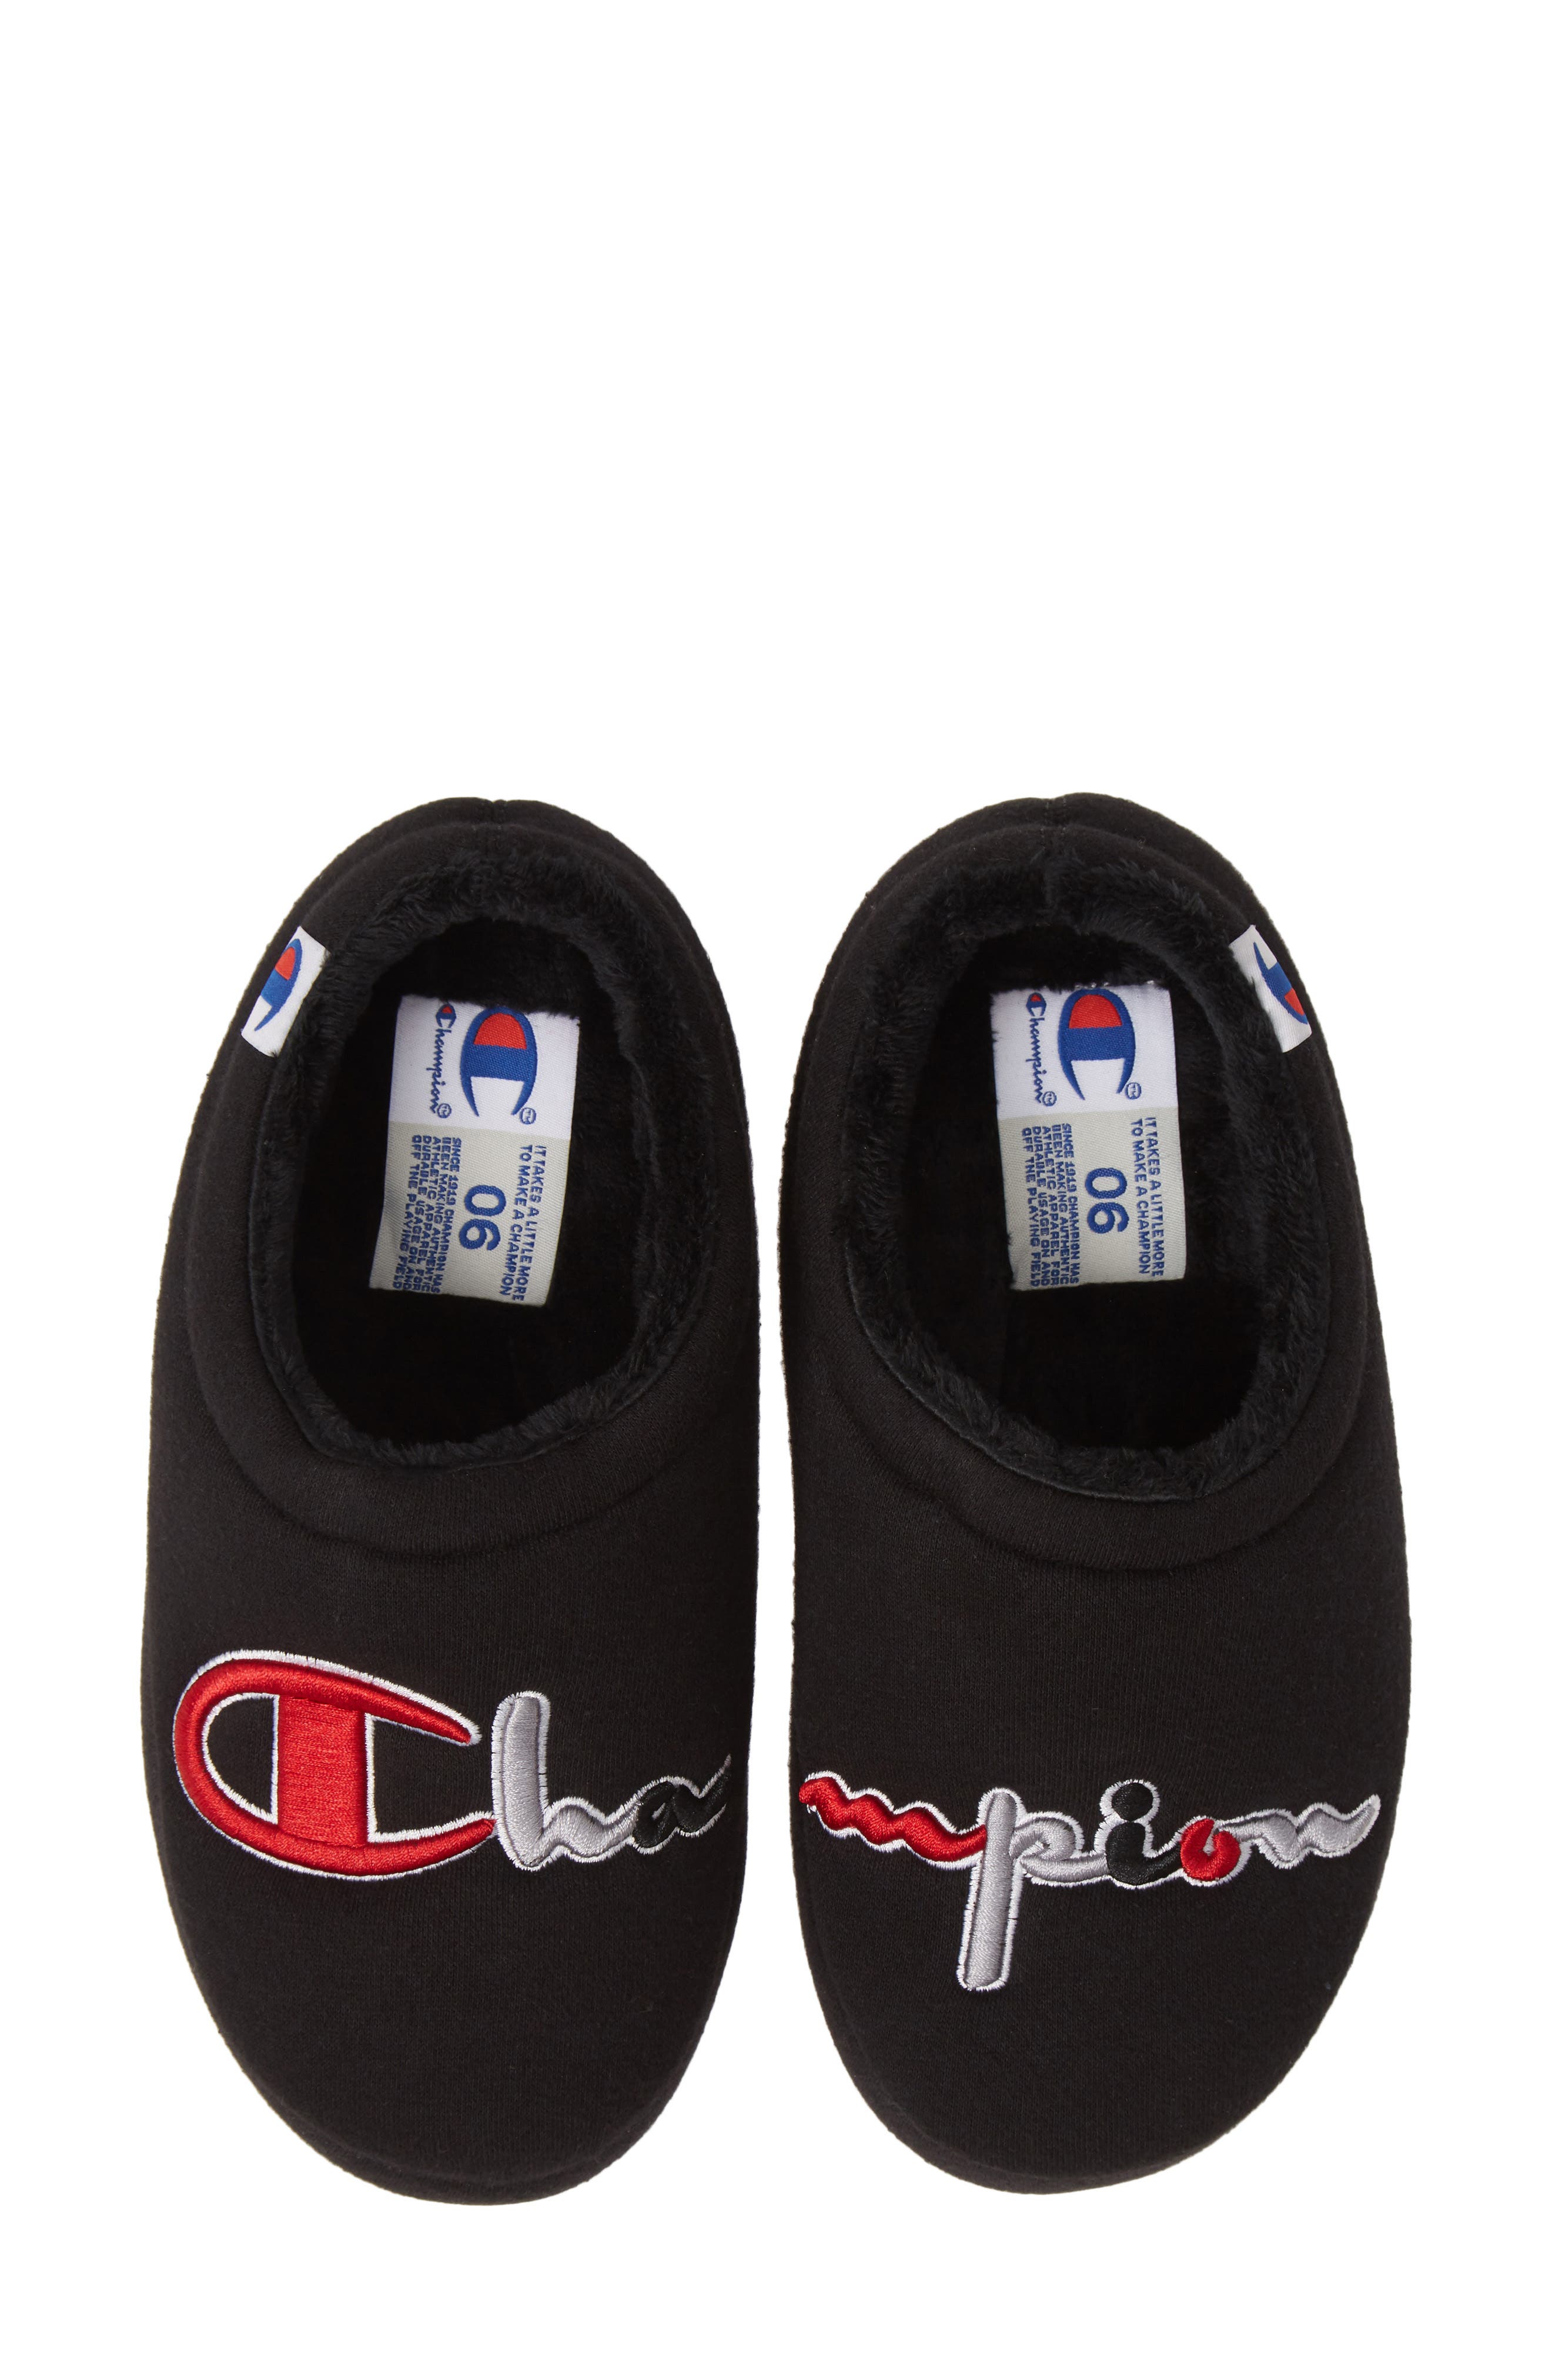 champion bed slippers